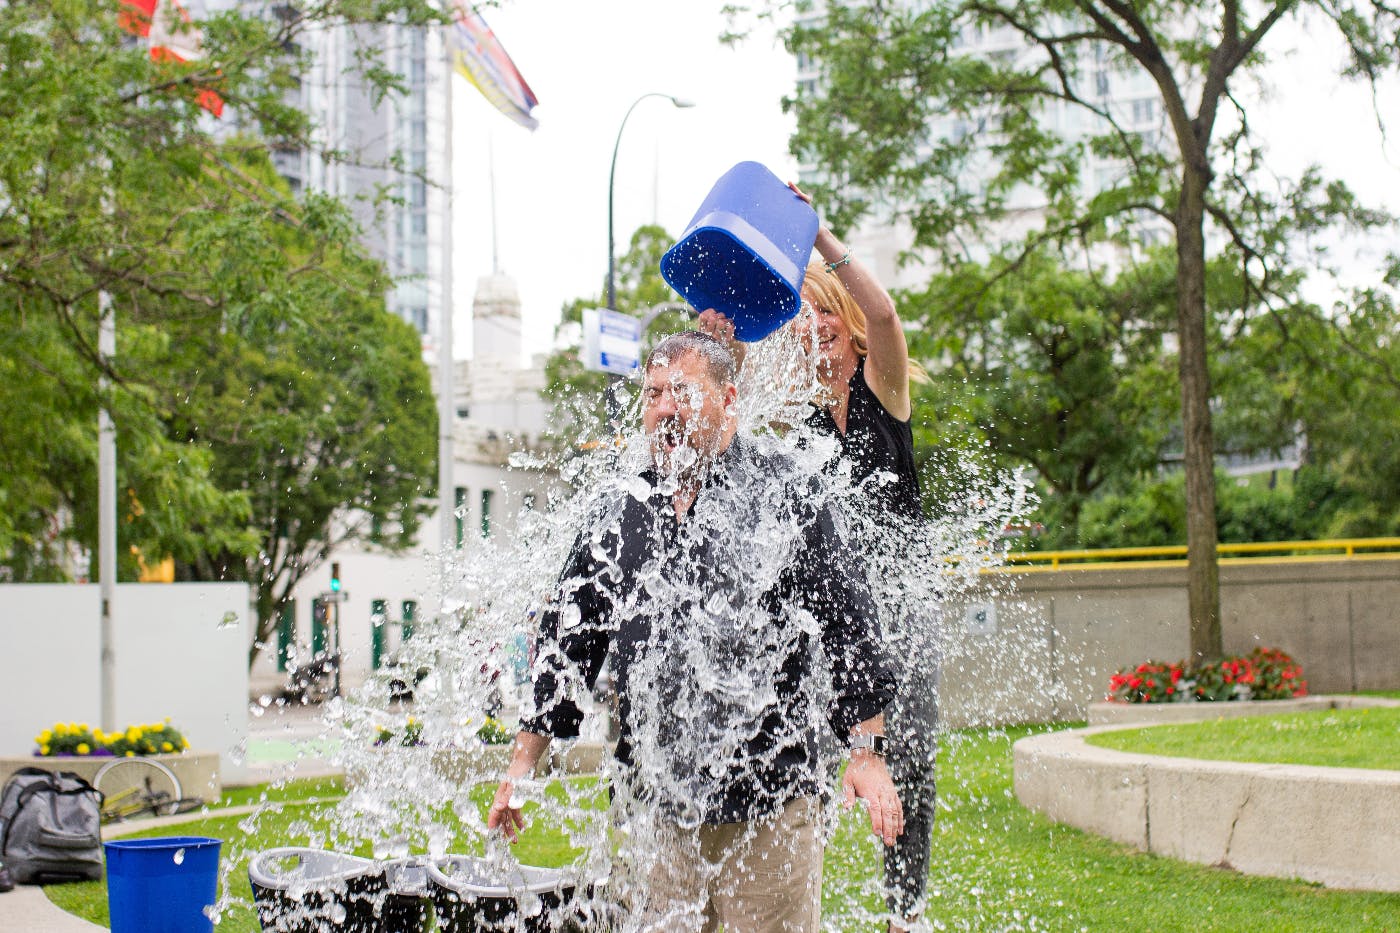 A woman pouring a bucket of ice water over a man's head in a park